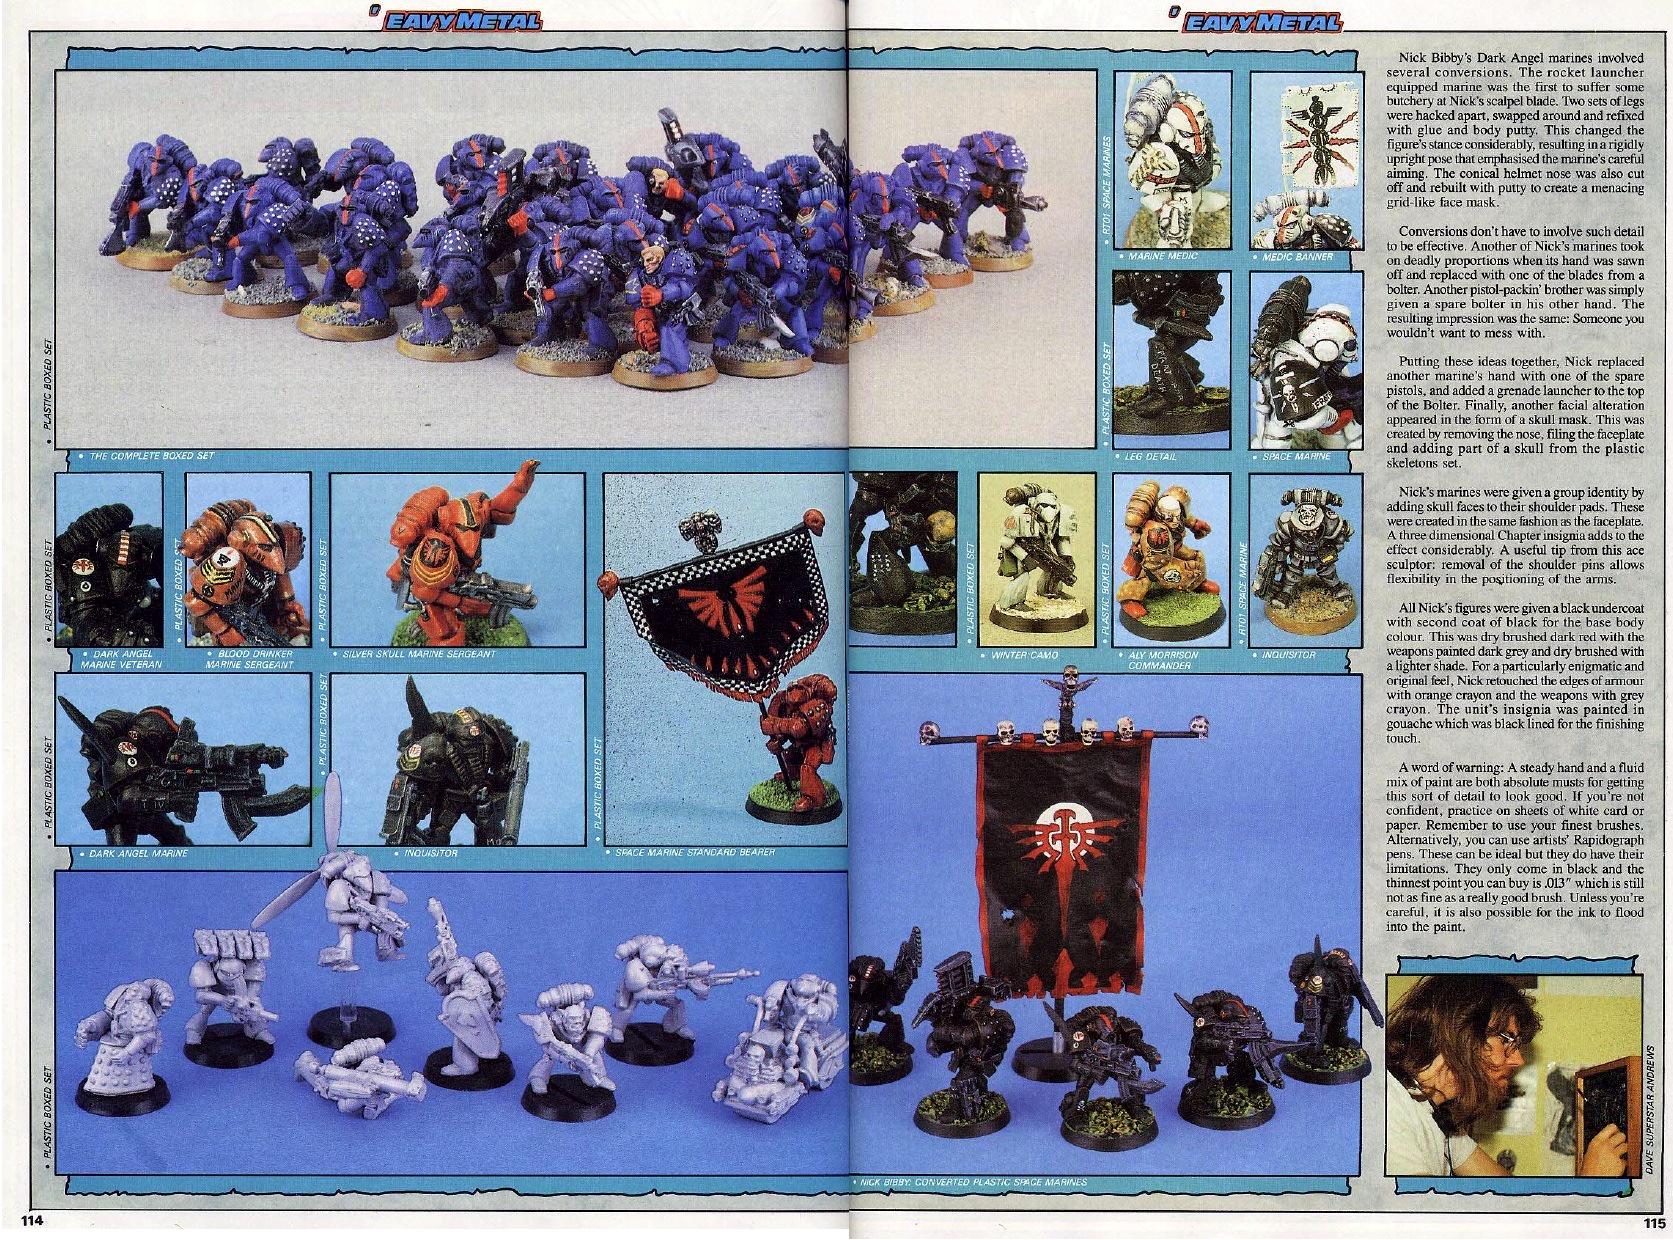 Compendium, Conversion, Copyright Games Workshop, Oldhammer, Retro Review, Rogue Trader, Spae Marines